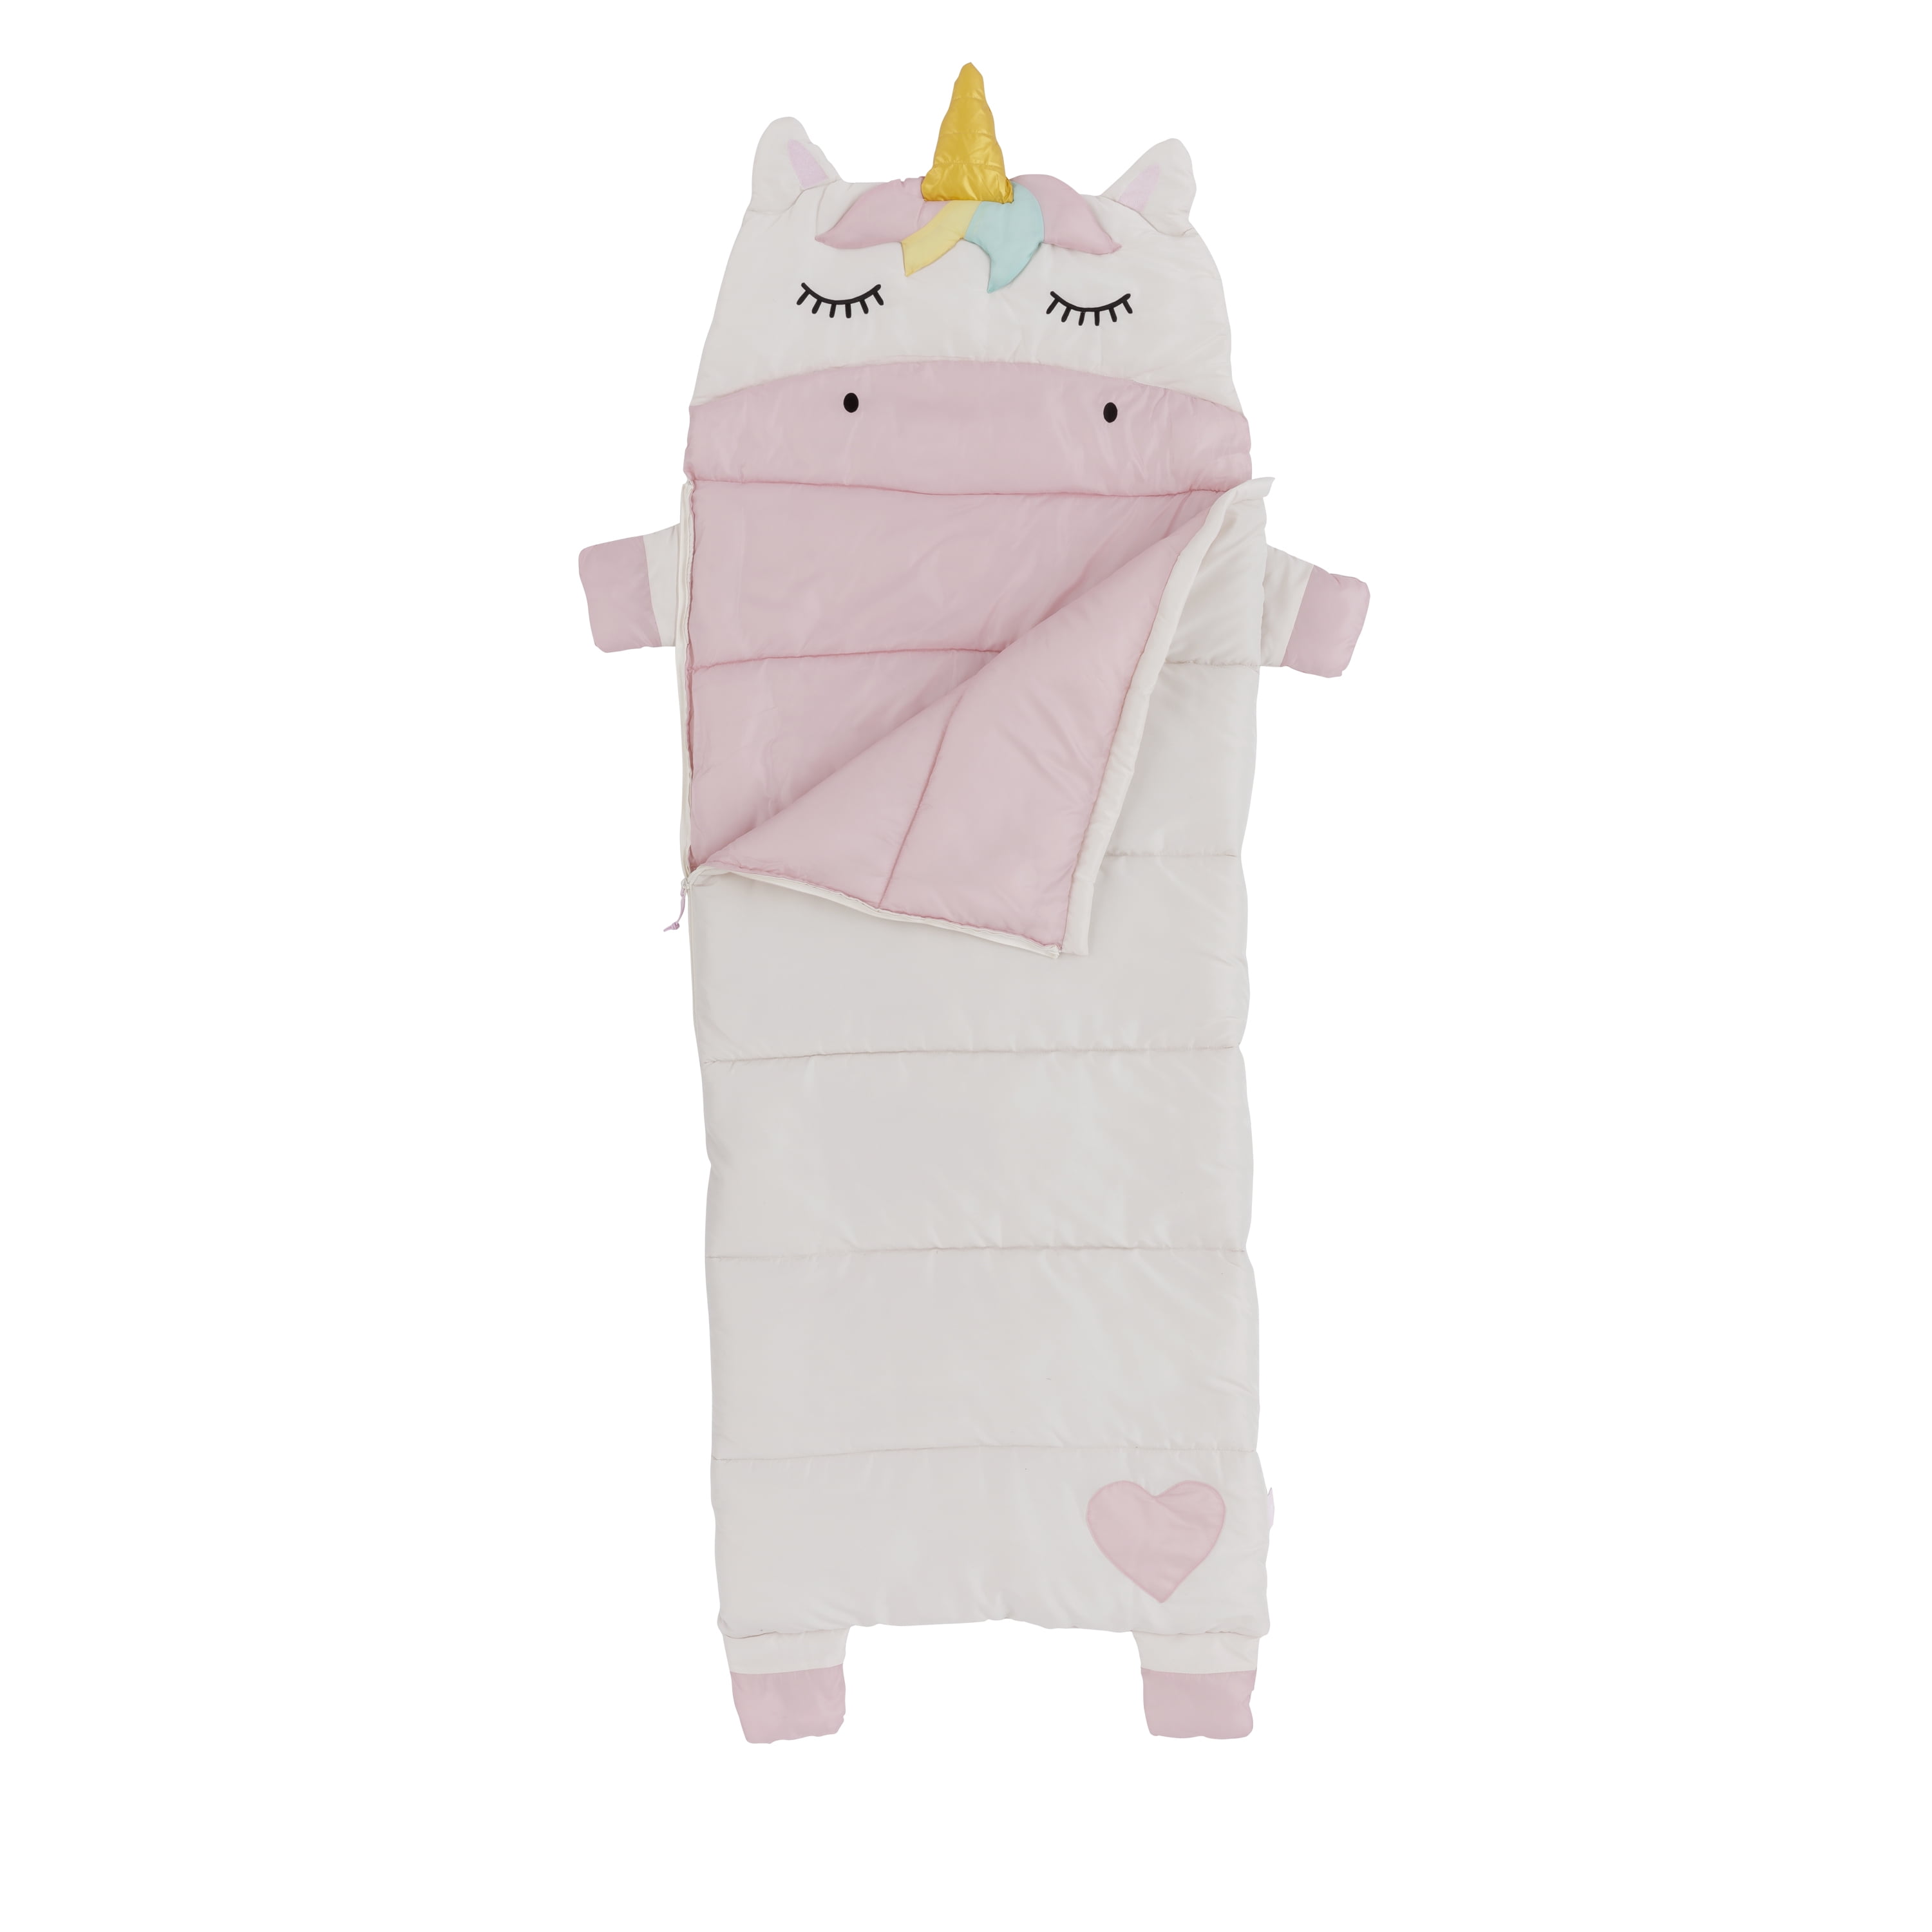 Firefly! Gear Sparkle the Unicorn Kid's Sleeping Bag - Pink/Off-White Color in. x 24 in.) - Walmart.com